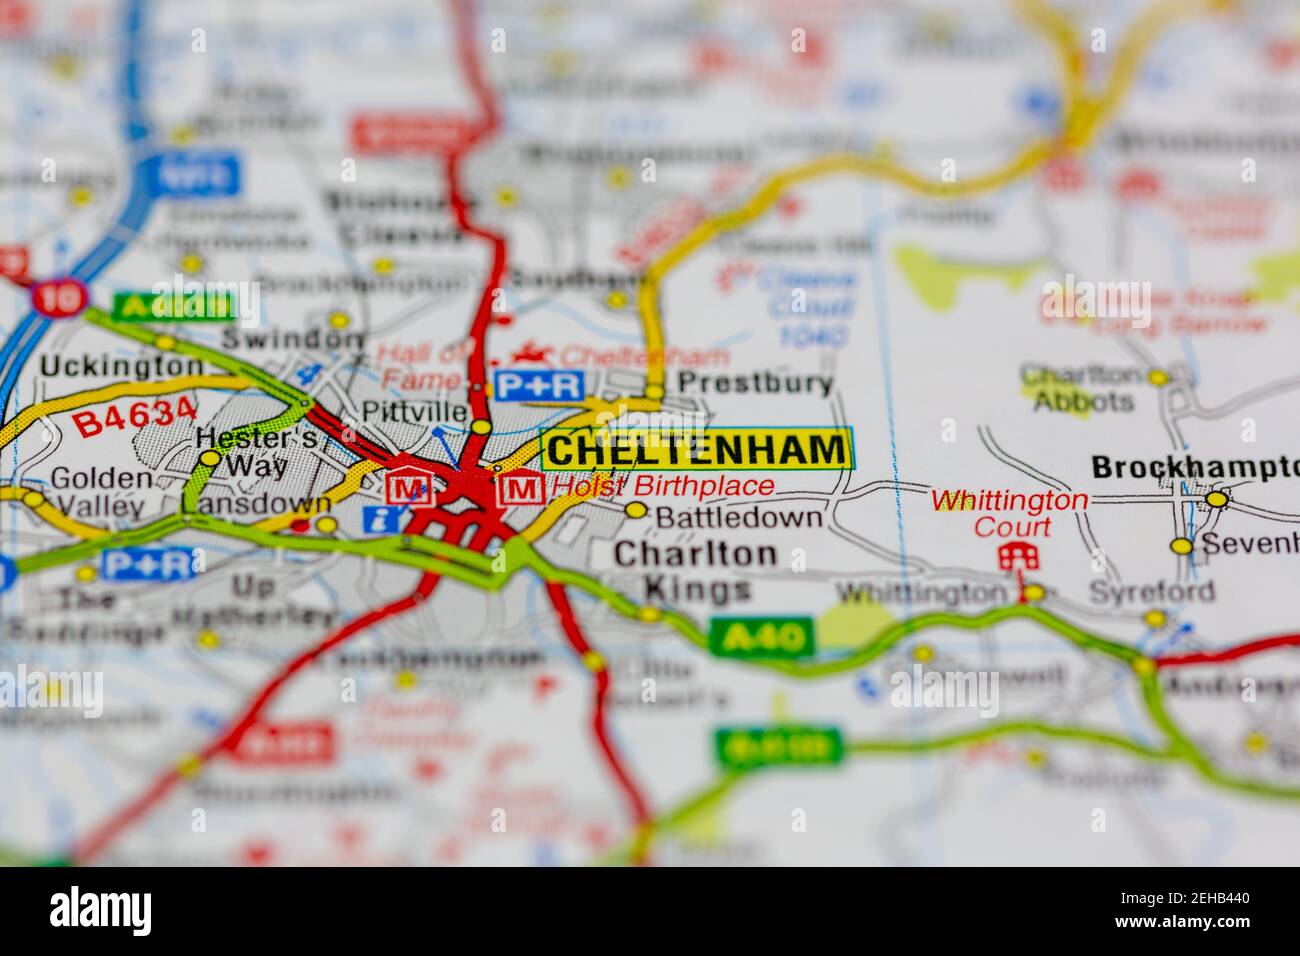 Cheltenham And Surrounding Areas Shown On A Road Map Or Geography Map 2EHB440 